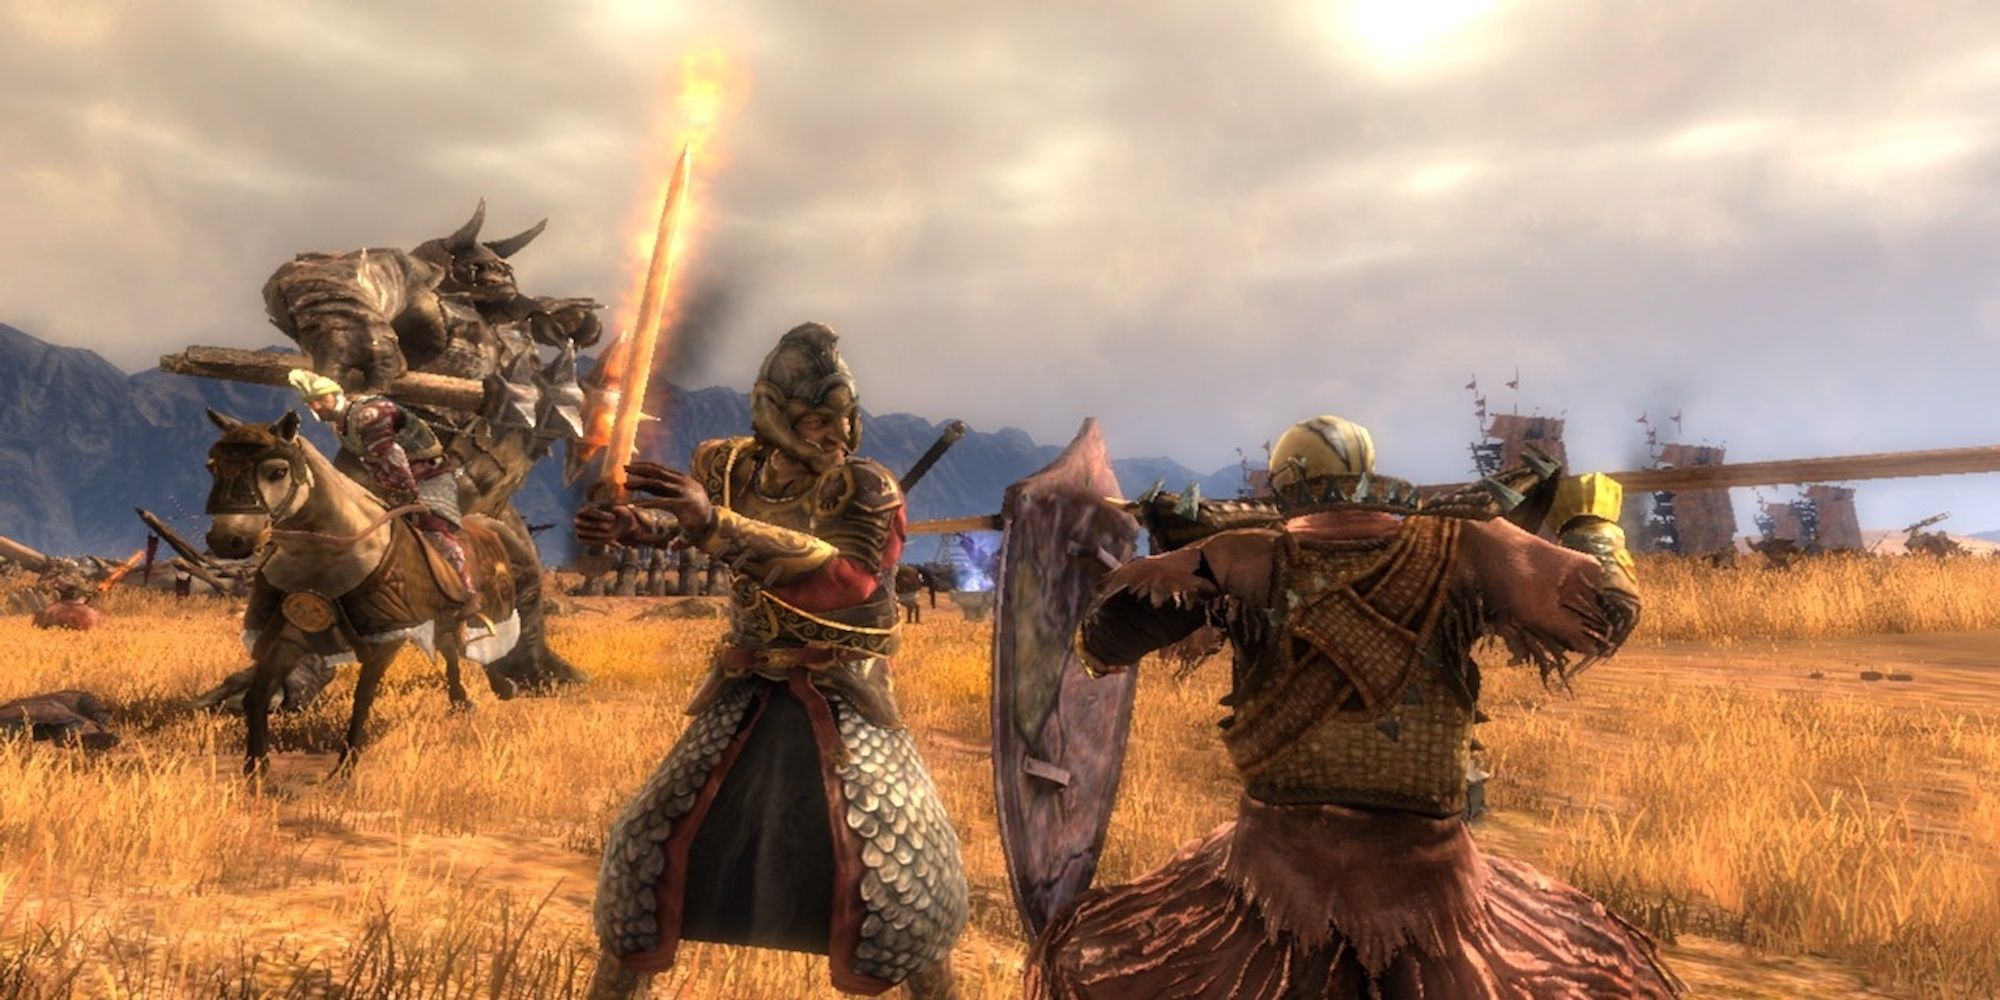 Fighting enemies in The Lord Of The Rings Conquest